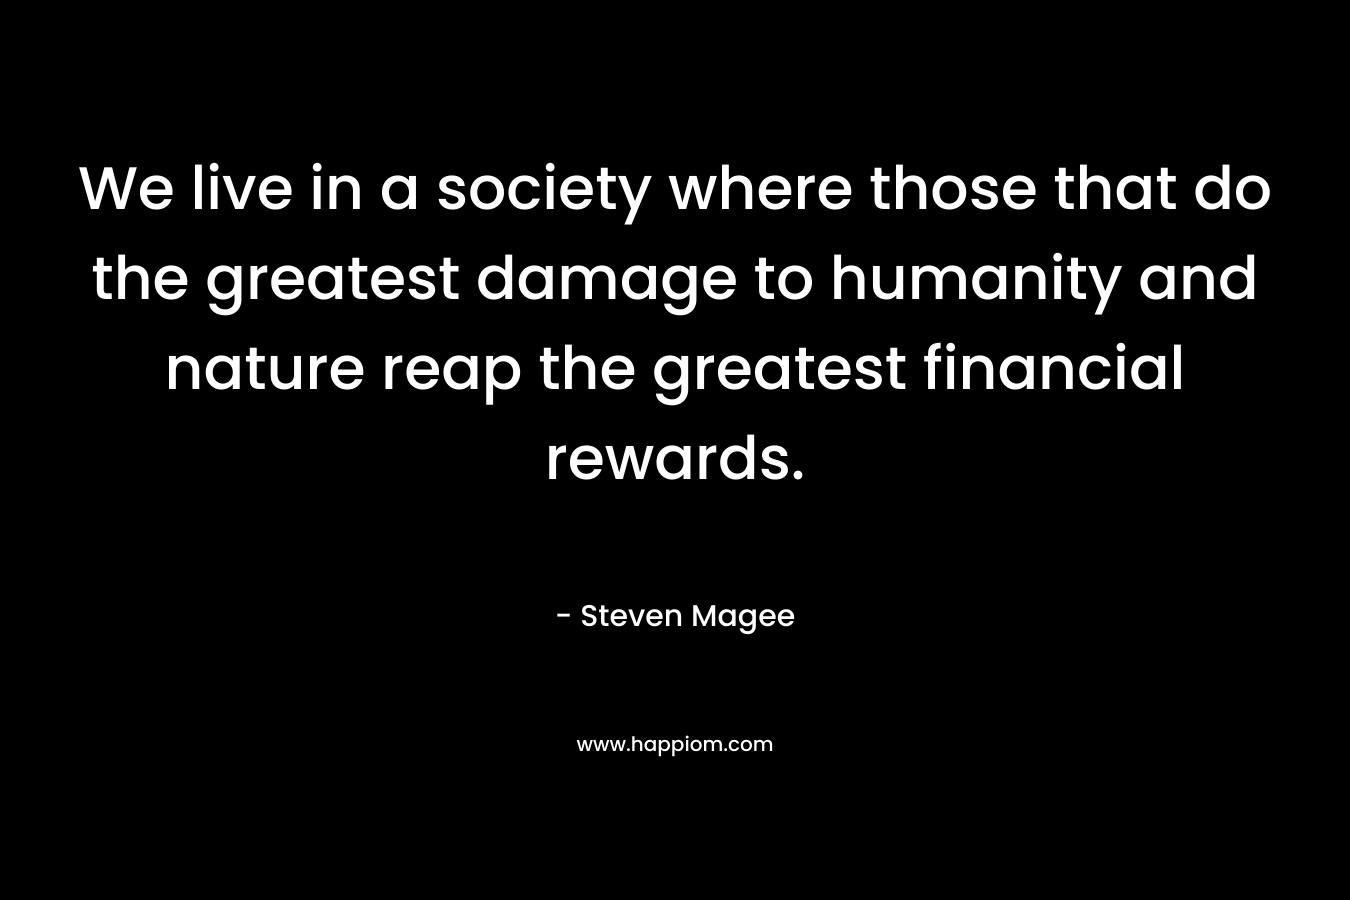 We live in a society where those that do the greatest damage to humanity and nature reap the greatest financial rewards.